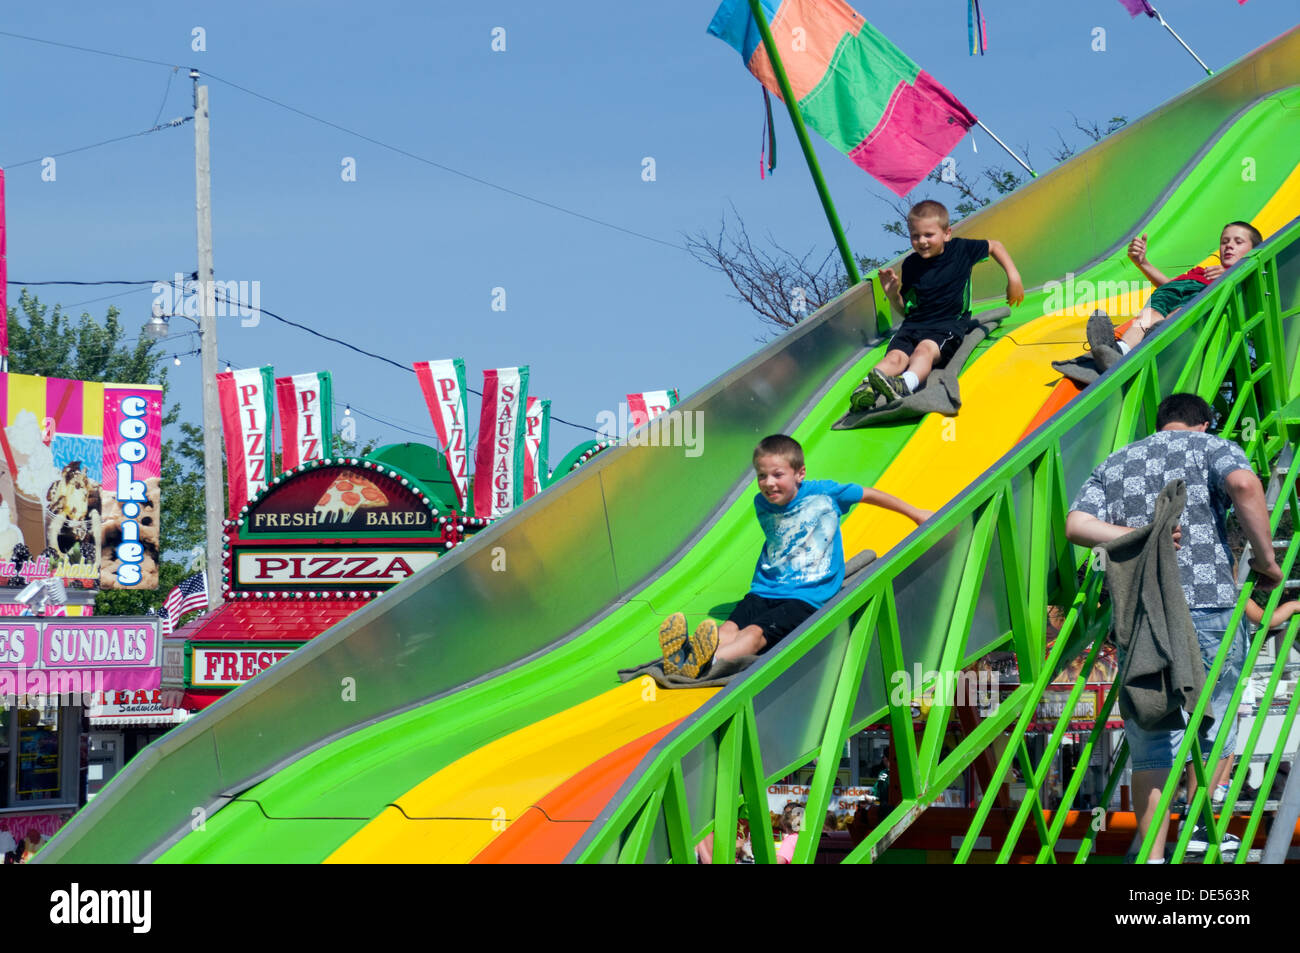 Three Boys On Super Slide Carnival Ride At Manitowoc Wisconsin